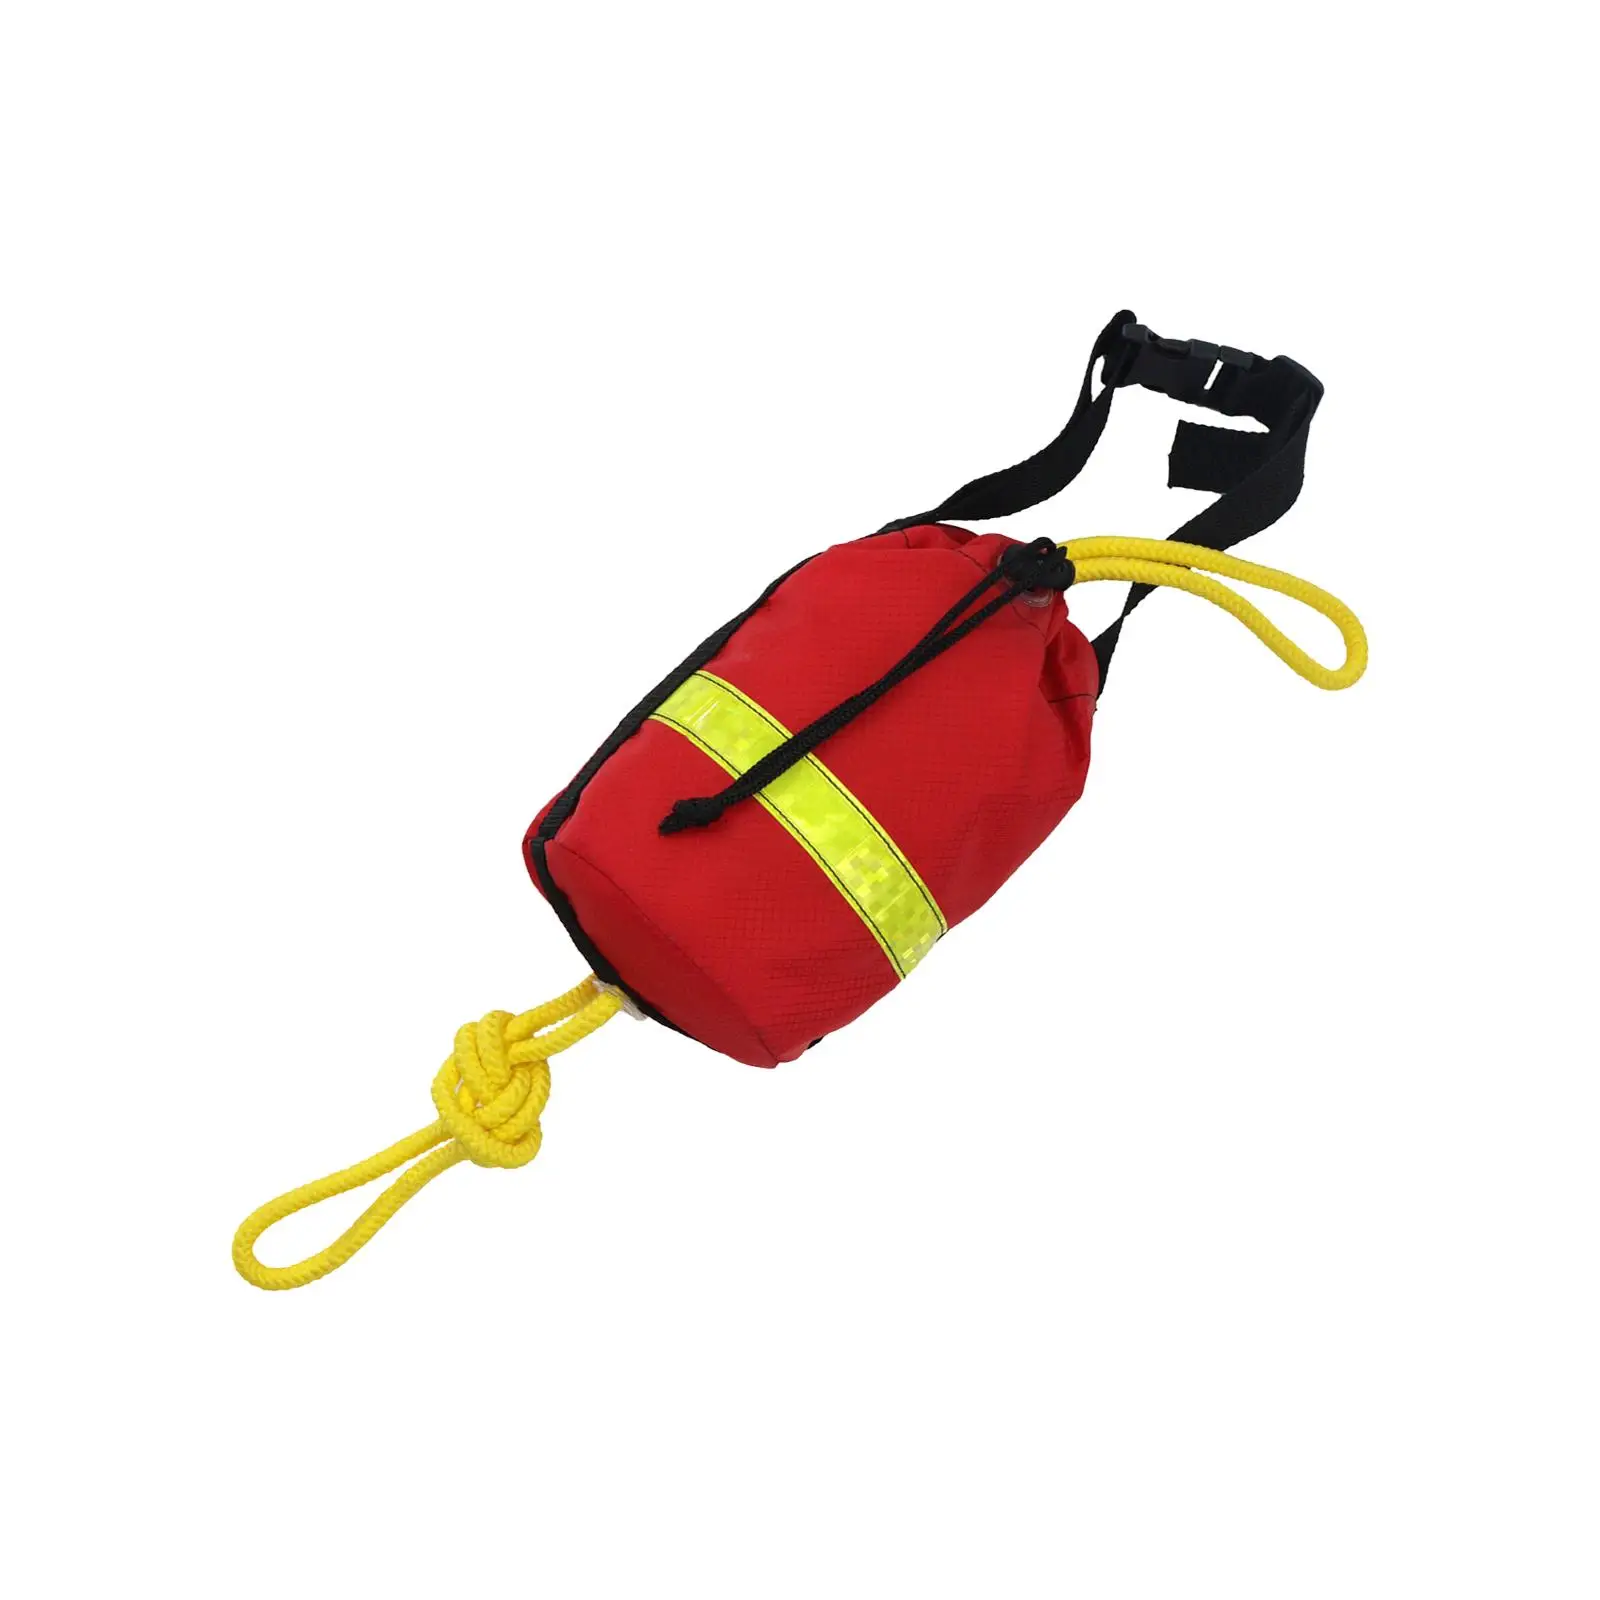 Rope Throw Bag Throwline 21M Floating Throw Bag for Swimming